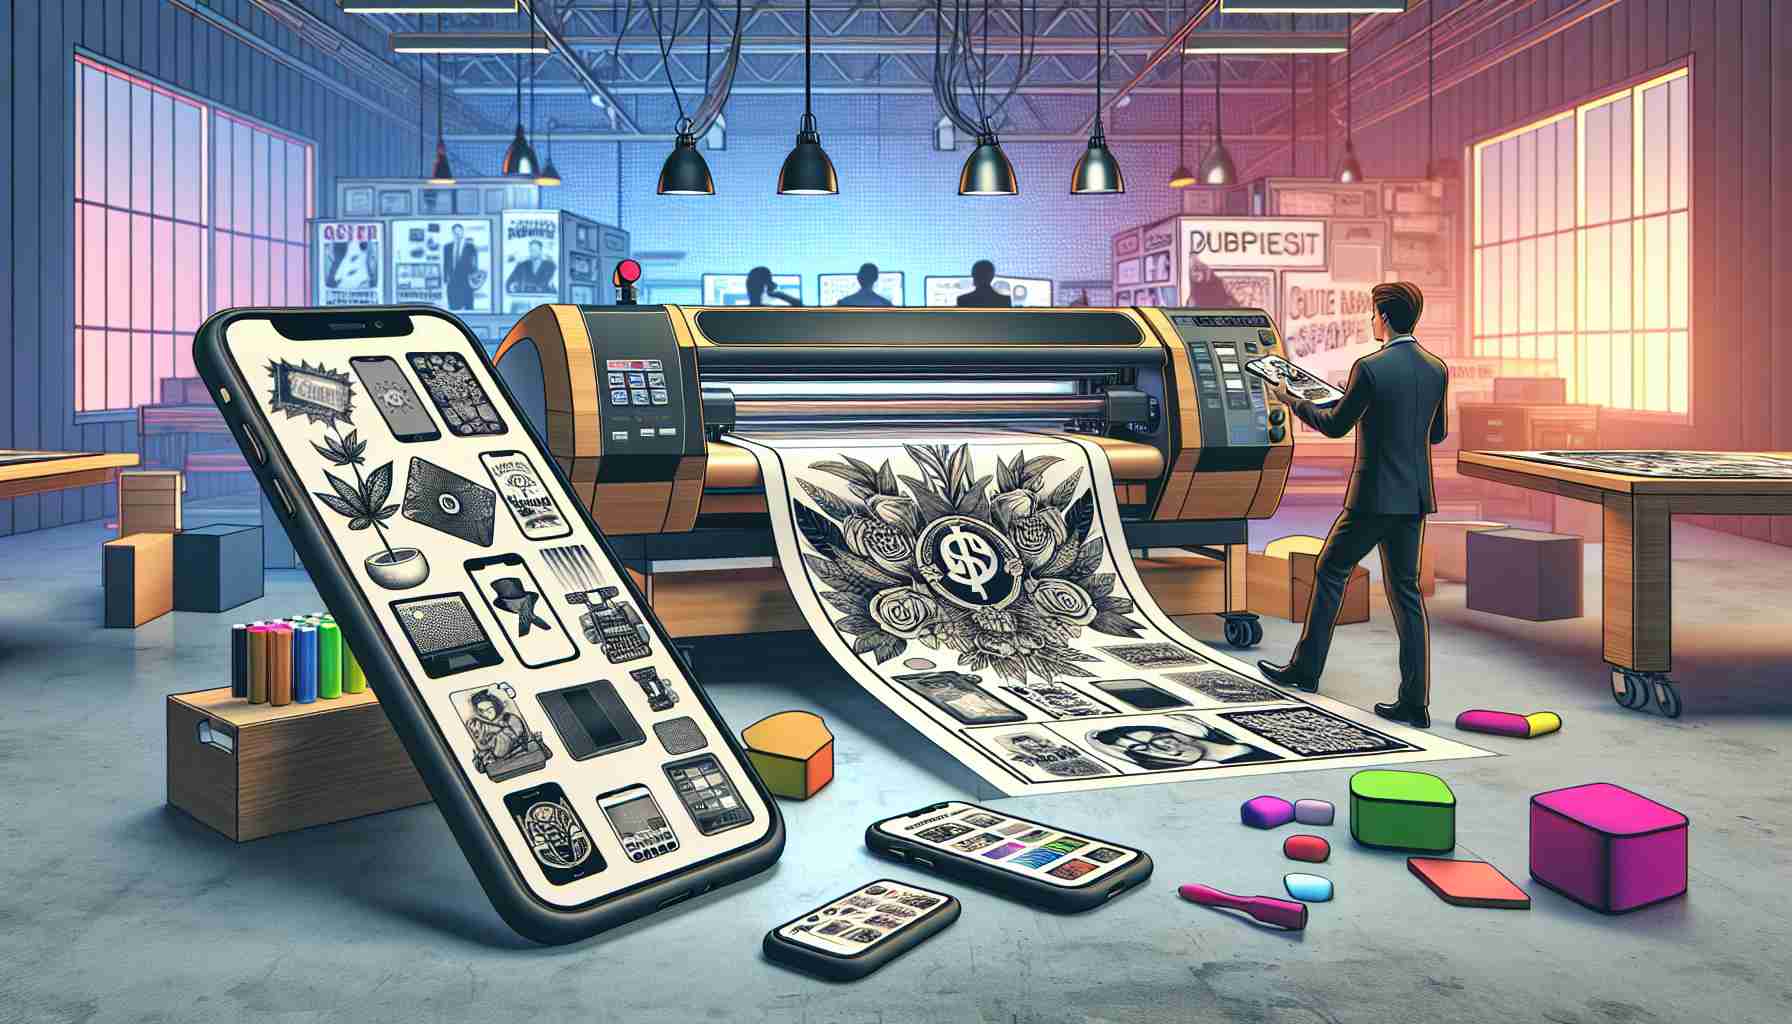 FOX Corporation Launches Custom Tech Accessories with On-Demand Printing